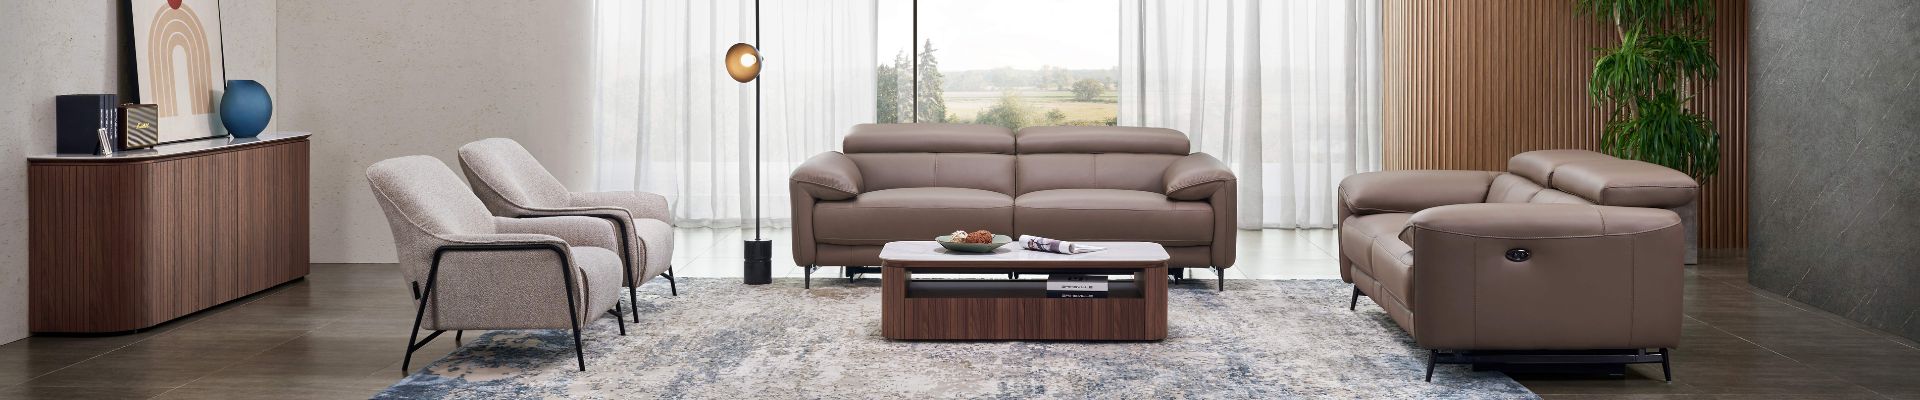 Medina Electric Recliner Sofa Collection - Gainsville